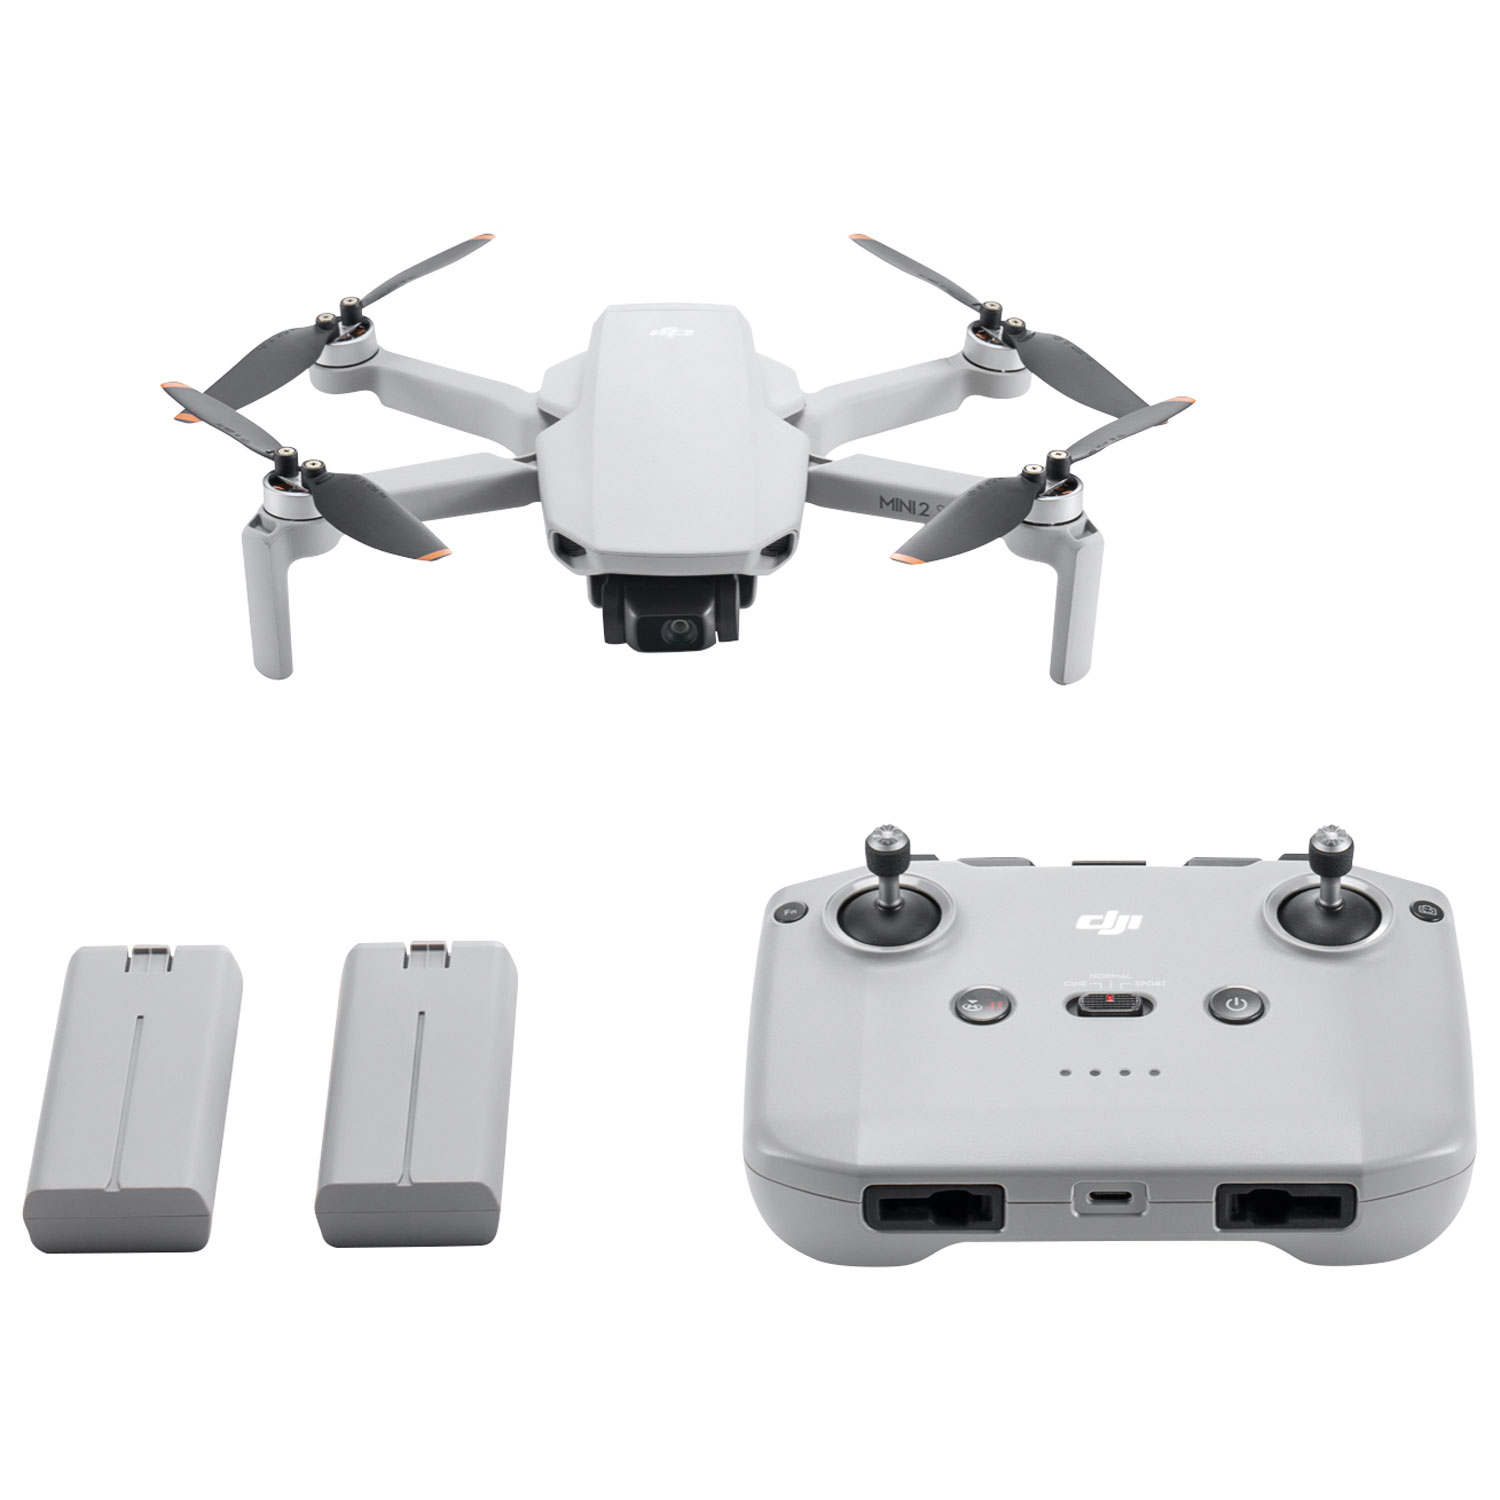 DJI Mini 2 SE Quadcopter Drone Fly More Combo with Remote Control - Grey